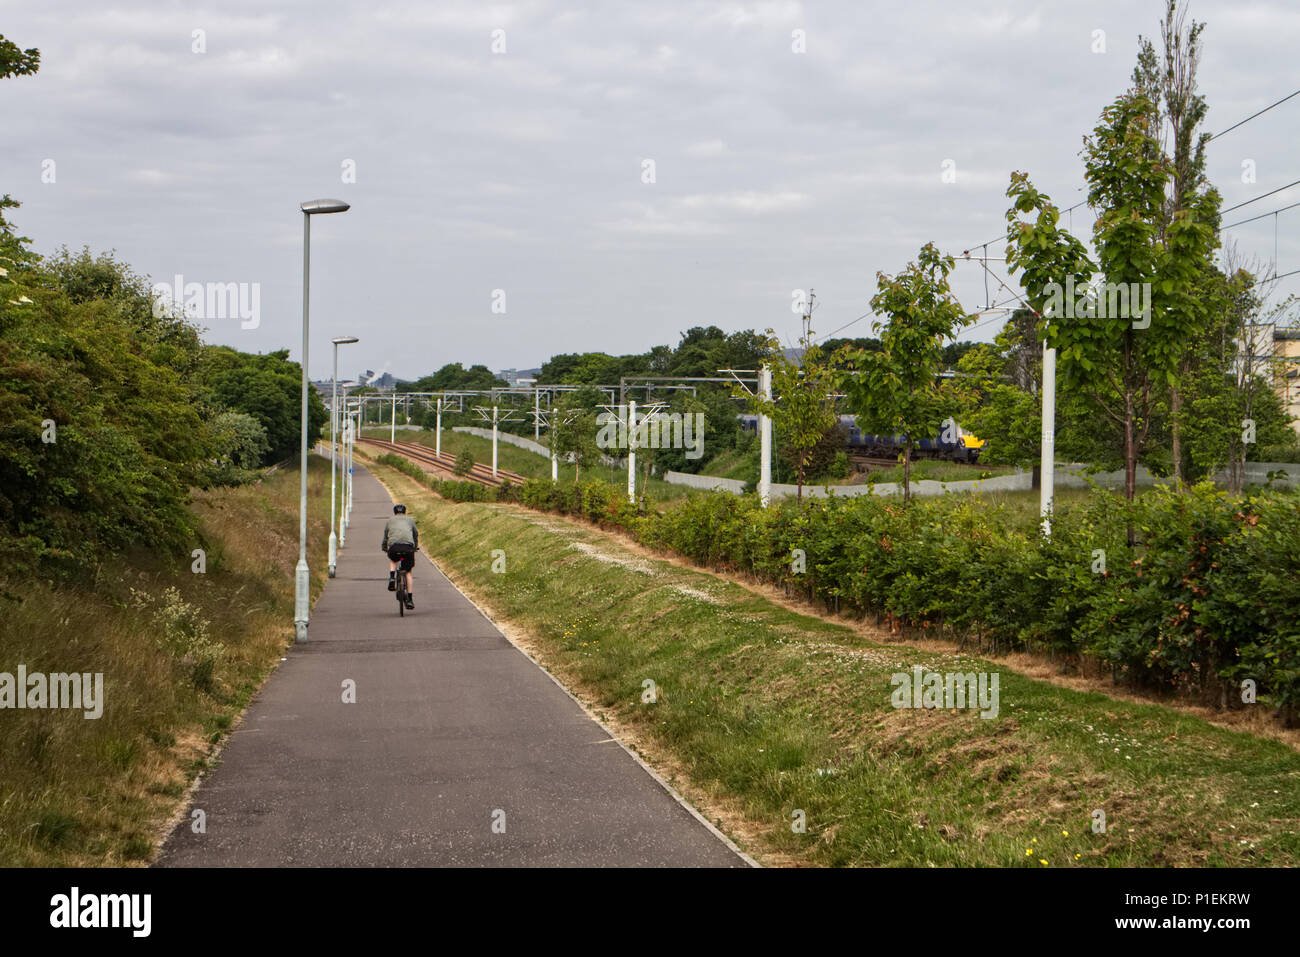 Edinburgh, Scotland / United Kingdom - June 11 2018: A man is cycling down a slope alongside a tram track while a Scotland train is travelling in the Stock Photo